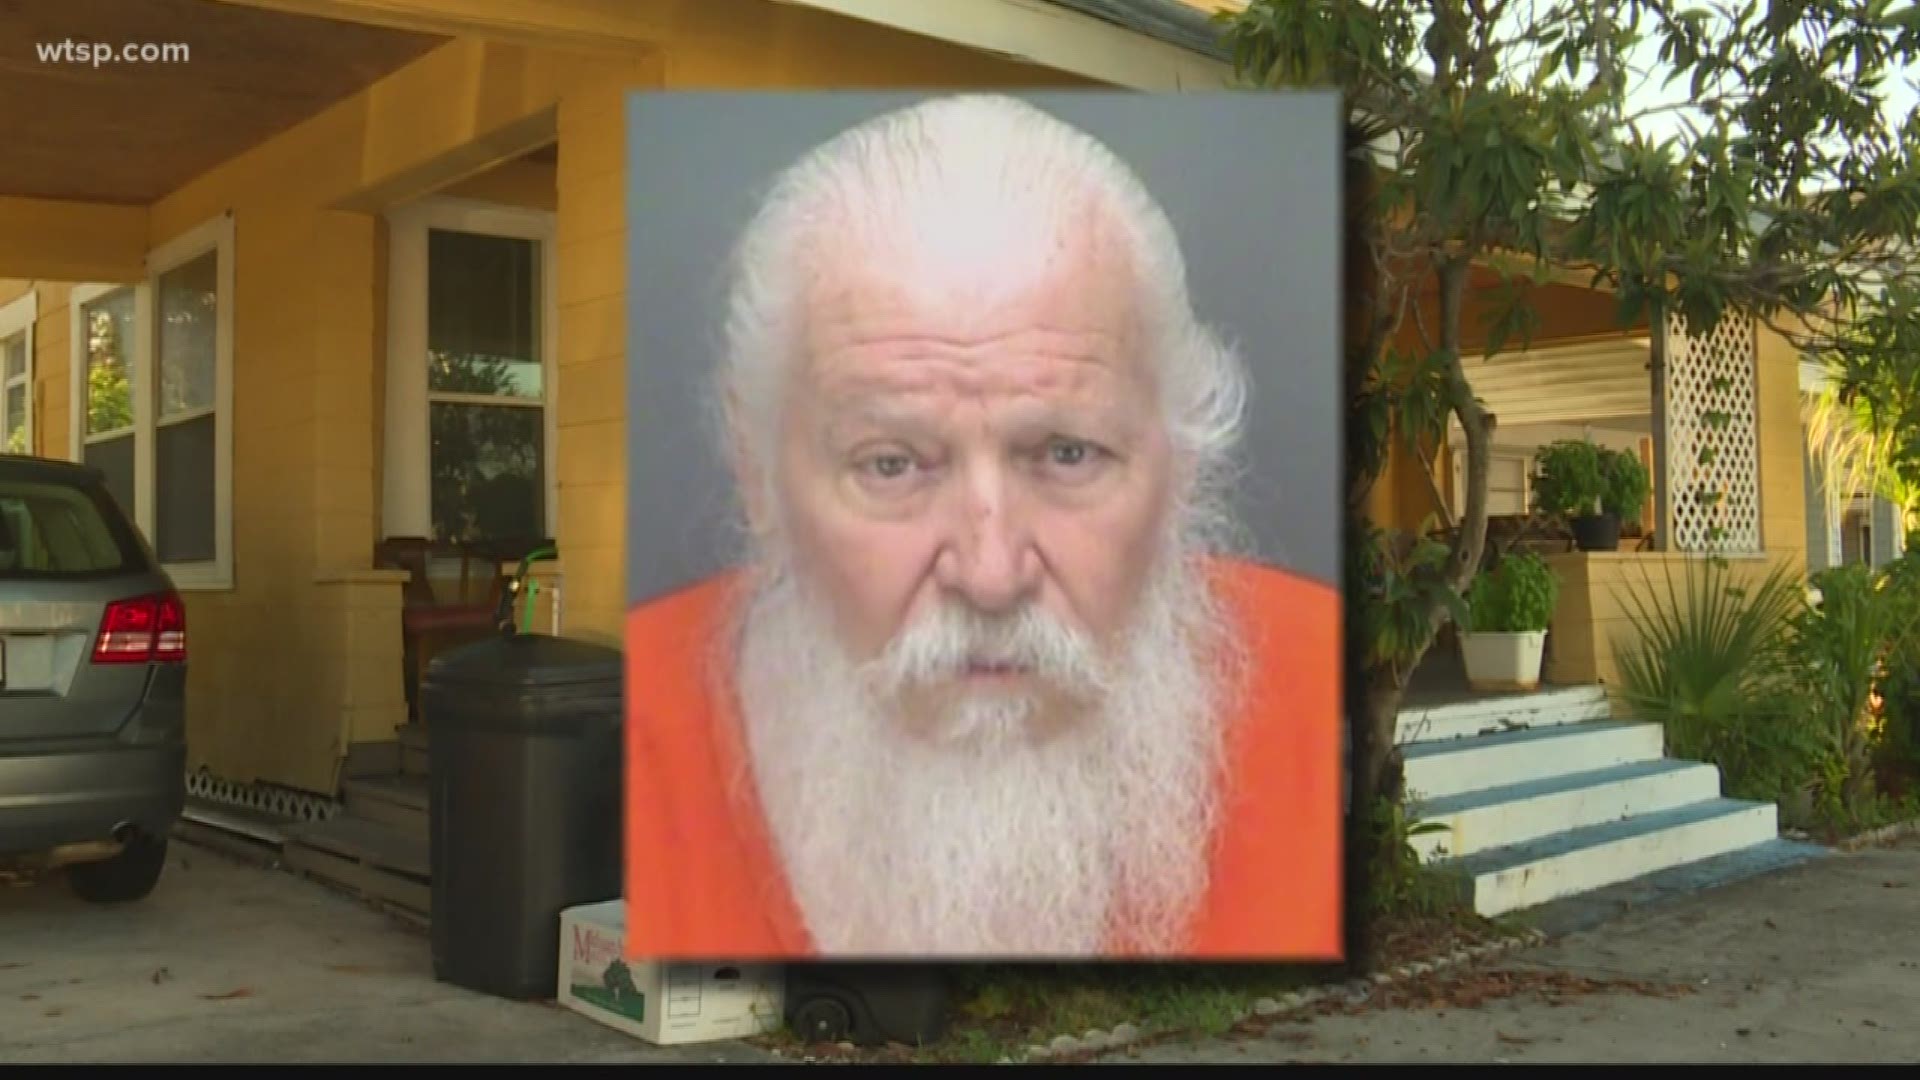 The Tarpon Springs Police Department arrested a retired clergy member accused of sexually battering a woman last week.

The police department received a complaint from a woman on May 27. The woman reported she had been sexually battered on Pinellas Avenue earlier that day, police say.

Following an investigation, detectives say the suspect was identified as Koumianoa Hatzileris, 71, who lives at the location where the alleged sexual battery reportedly took place.